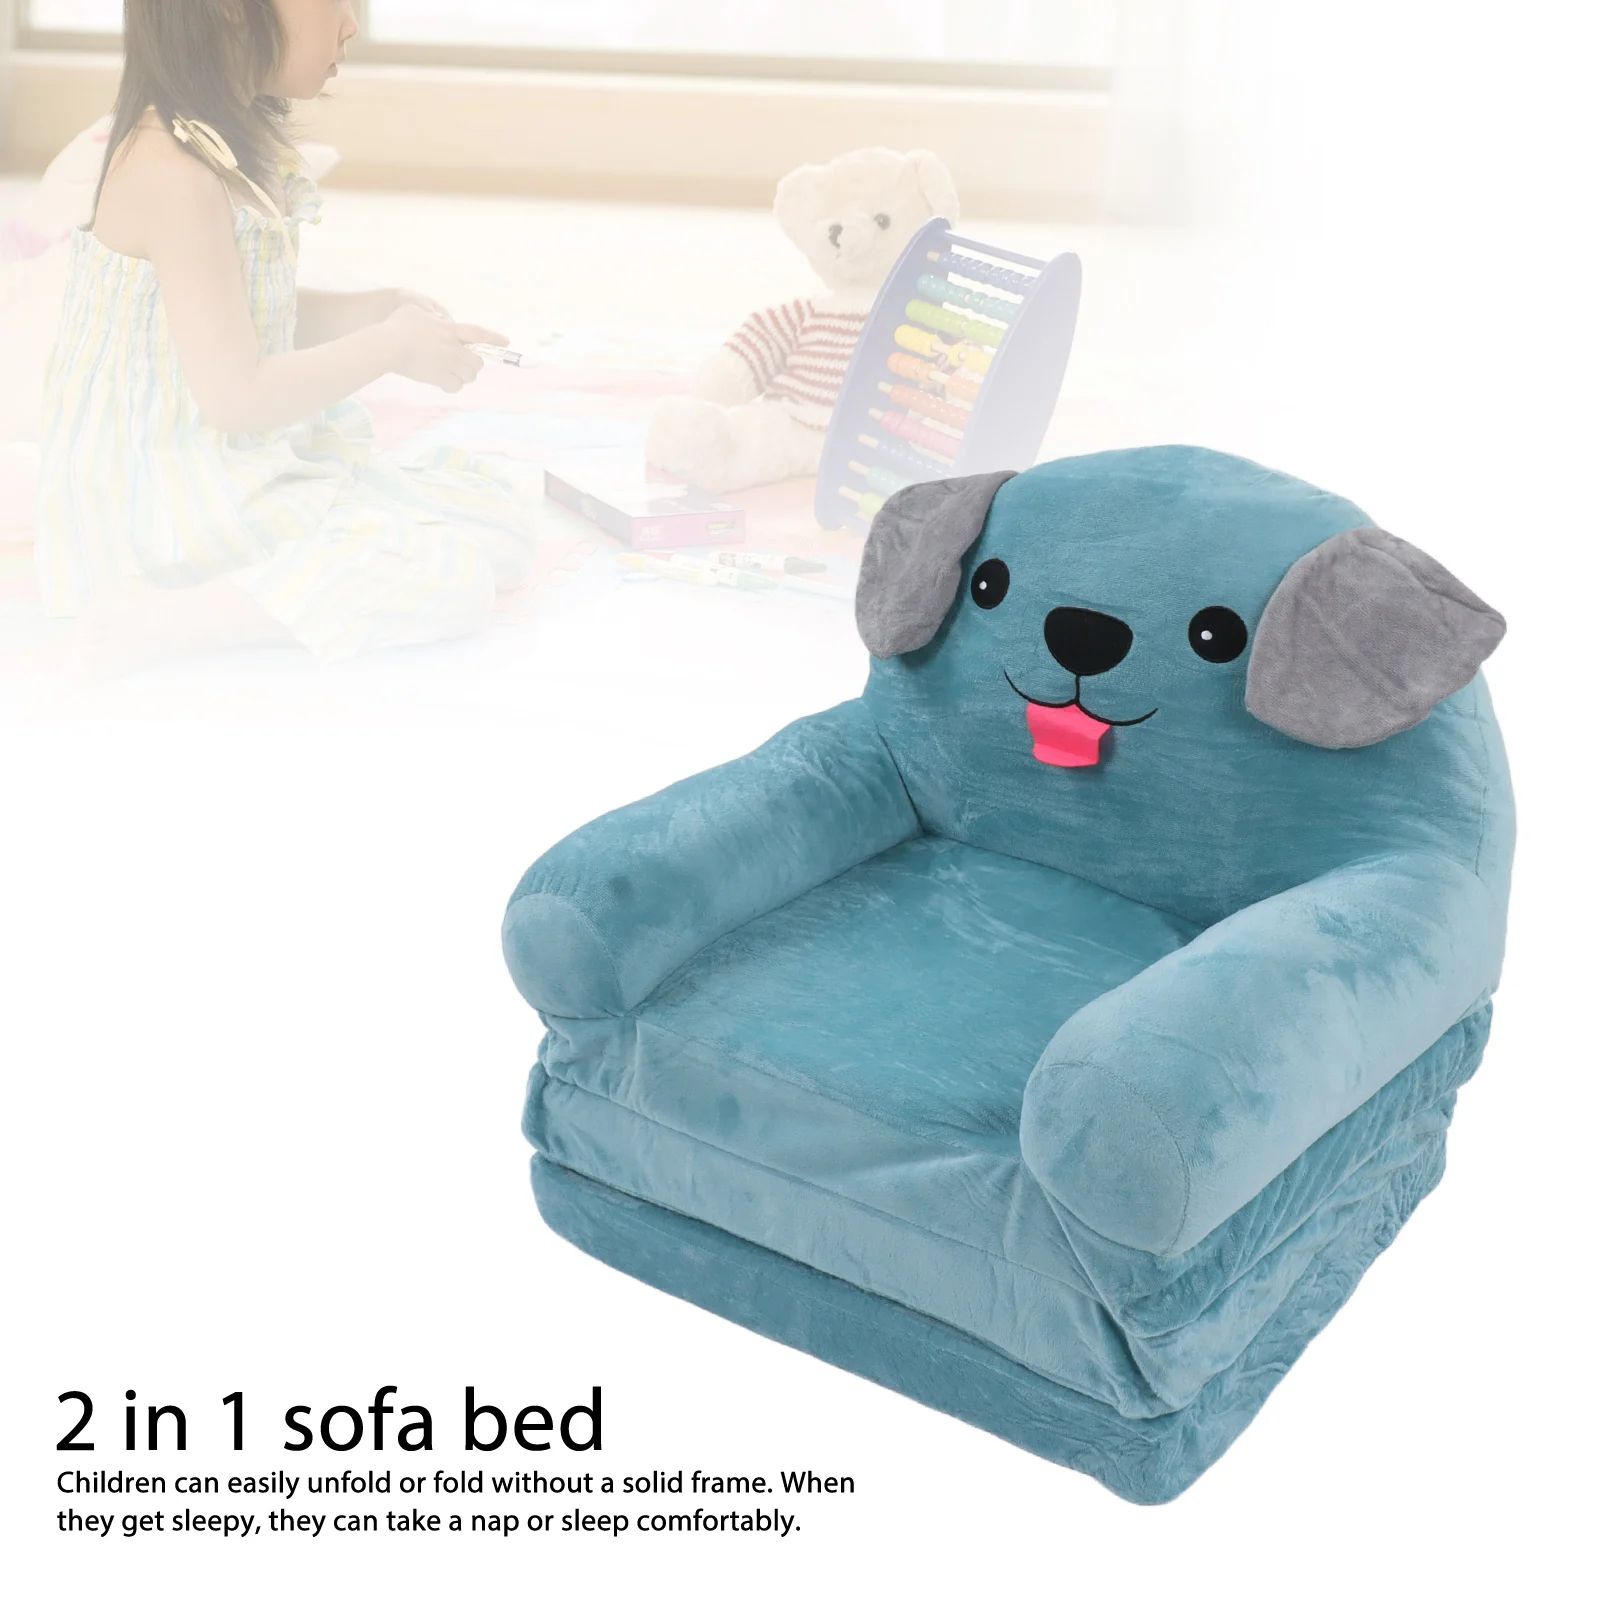 Children Sofa Blue Puppy Children's Sofa Cute Cartoon Folding Small Sofa Bed  Dual Use Child Bean Bag For Kids – Aliexpress With Regard To 2 In 1 Foldable Children's Sofa Beds (View 5 of 15)